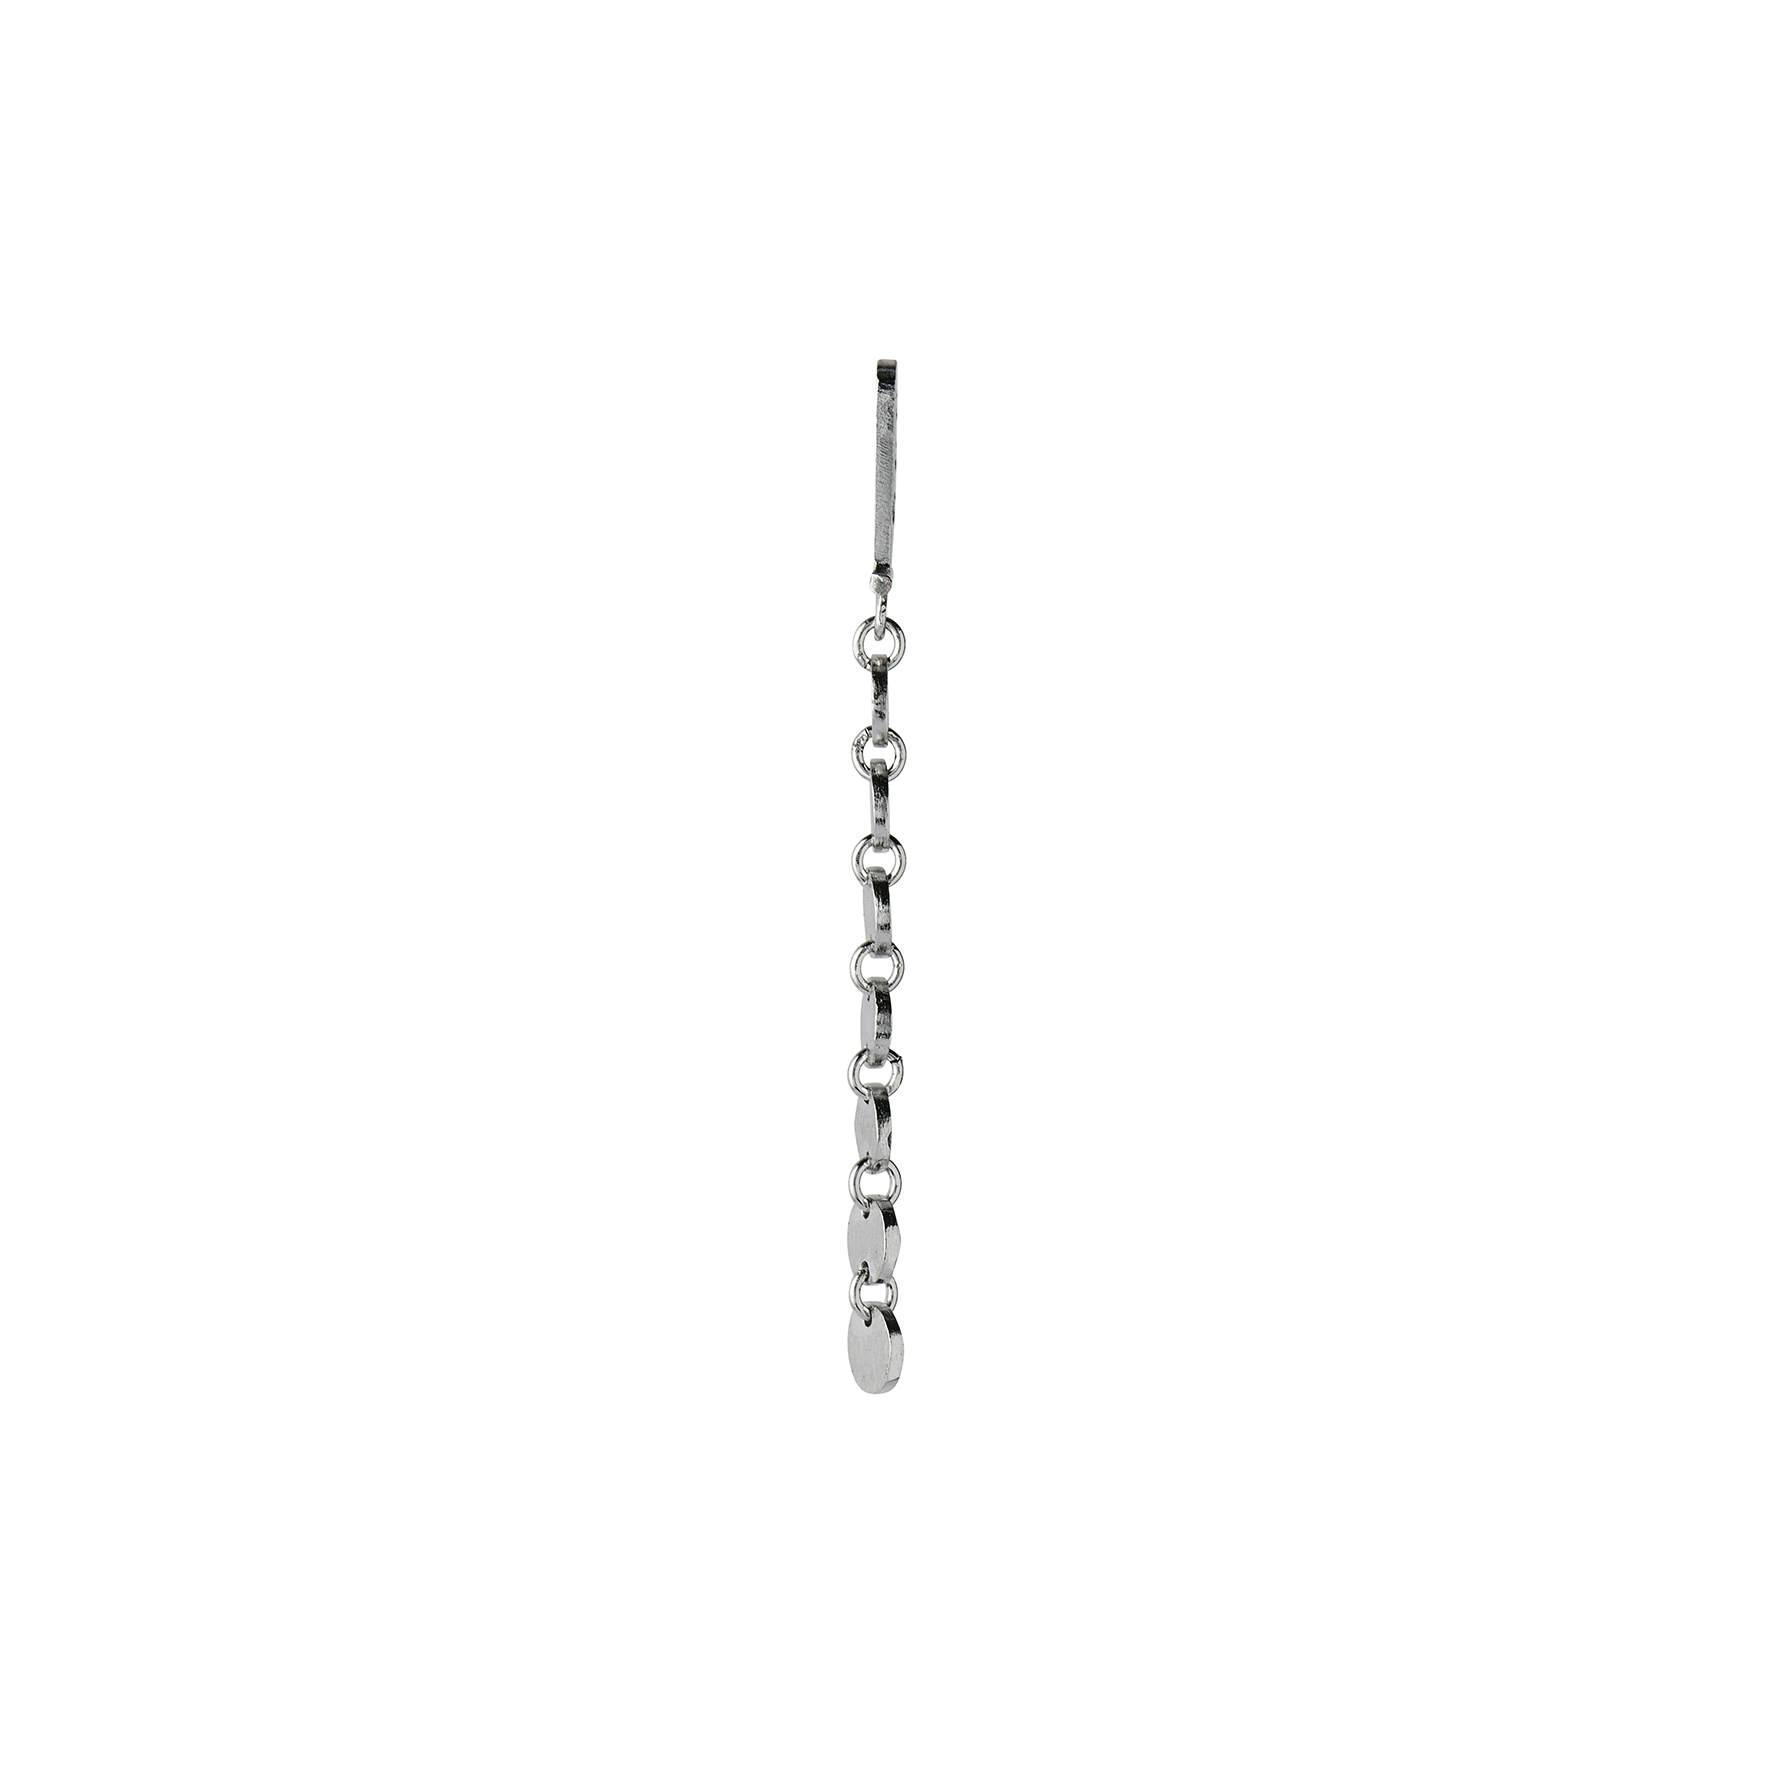 Petit Coins Behind Ear Earring von STINE A Jewelry in Silber Sterling 925